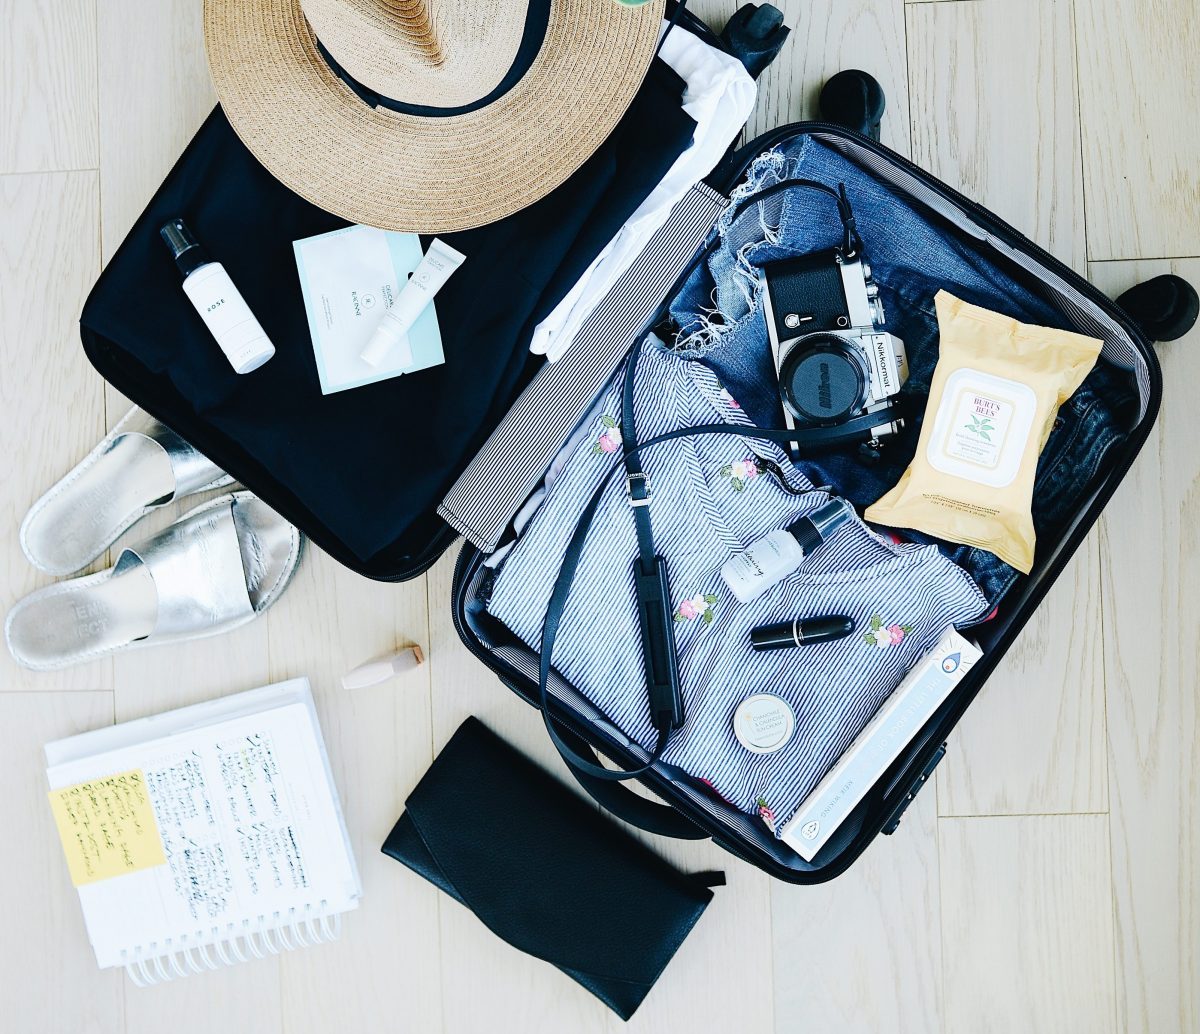 Packing Hacks for Holiday Travels